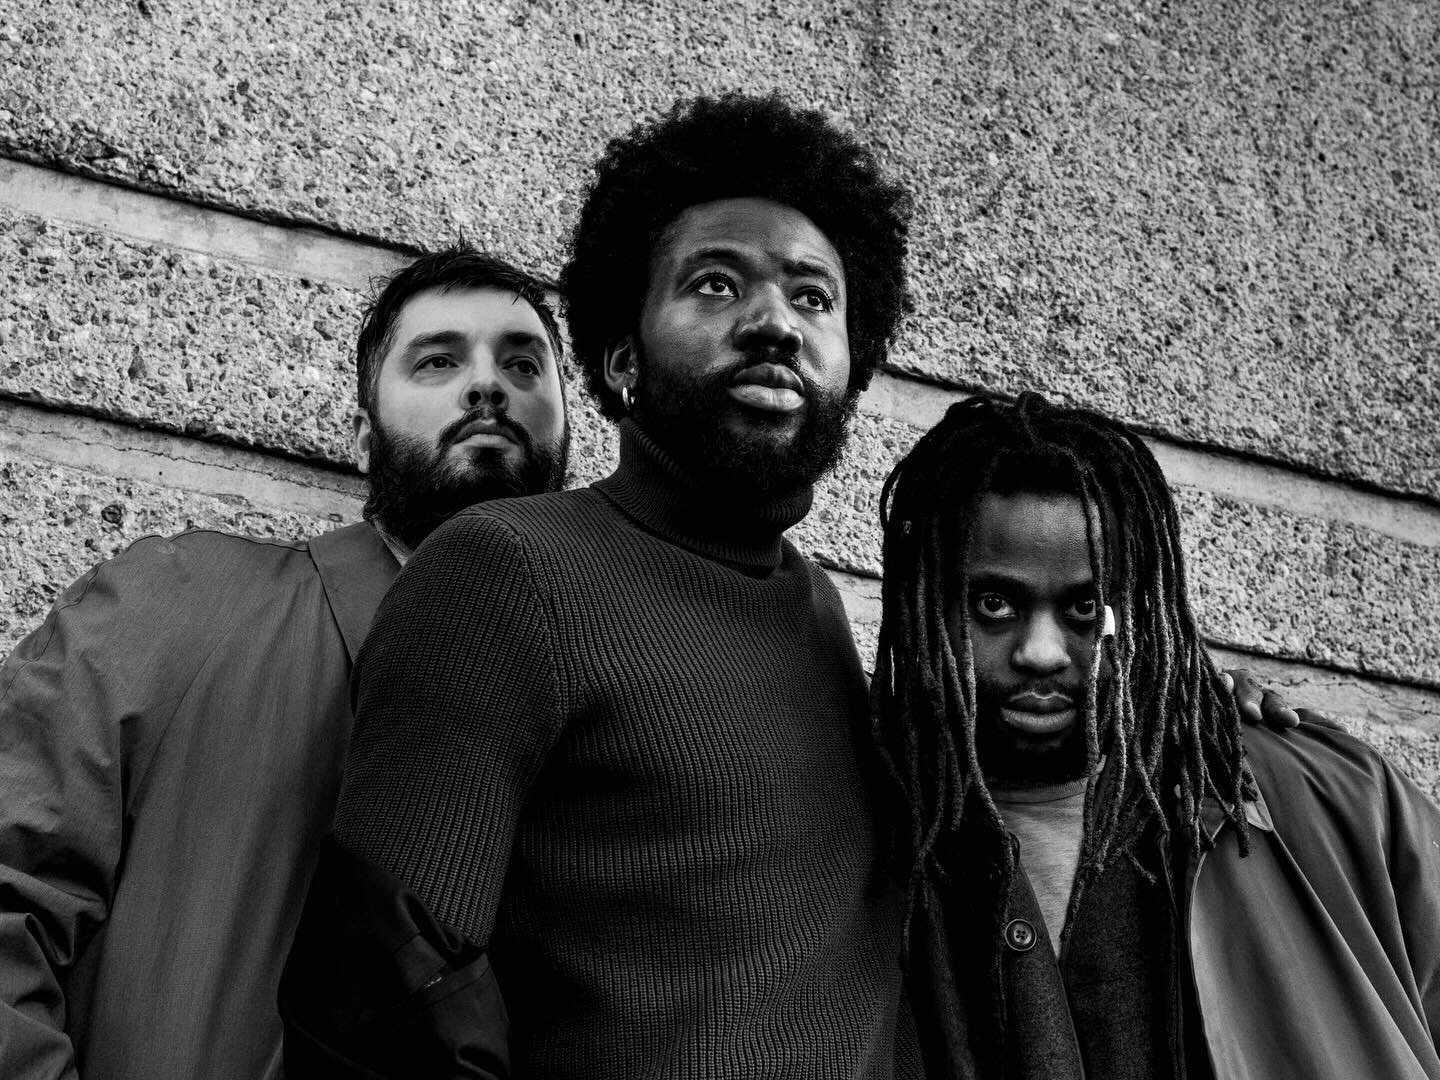 My next Selection of the Week is out! - And I will be seeing them tomorrow night in Washington DC

https://www.nextstage.life/podcasts/selection-of-the-week-young-fathers-i-saw